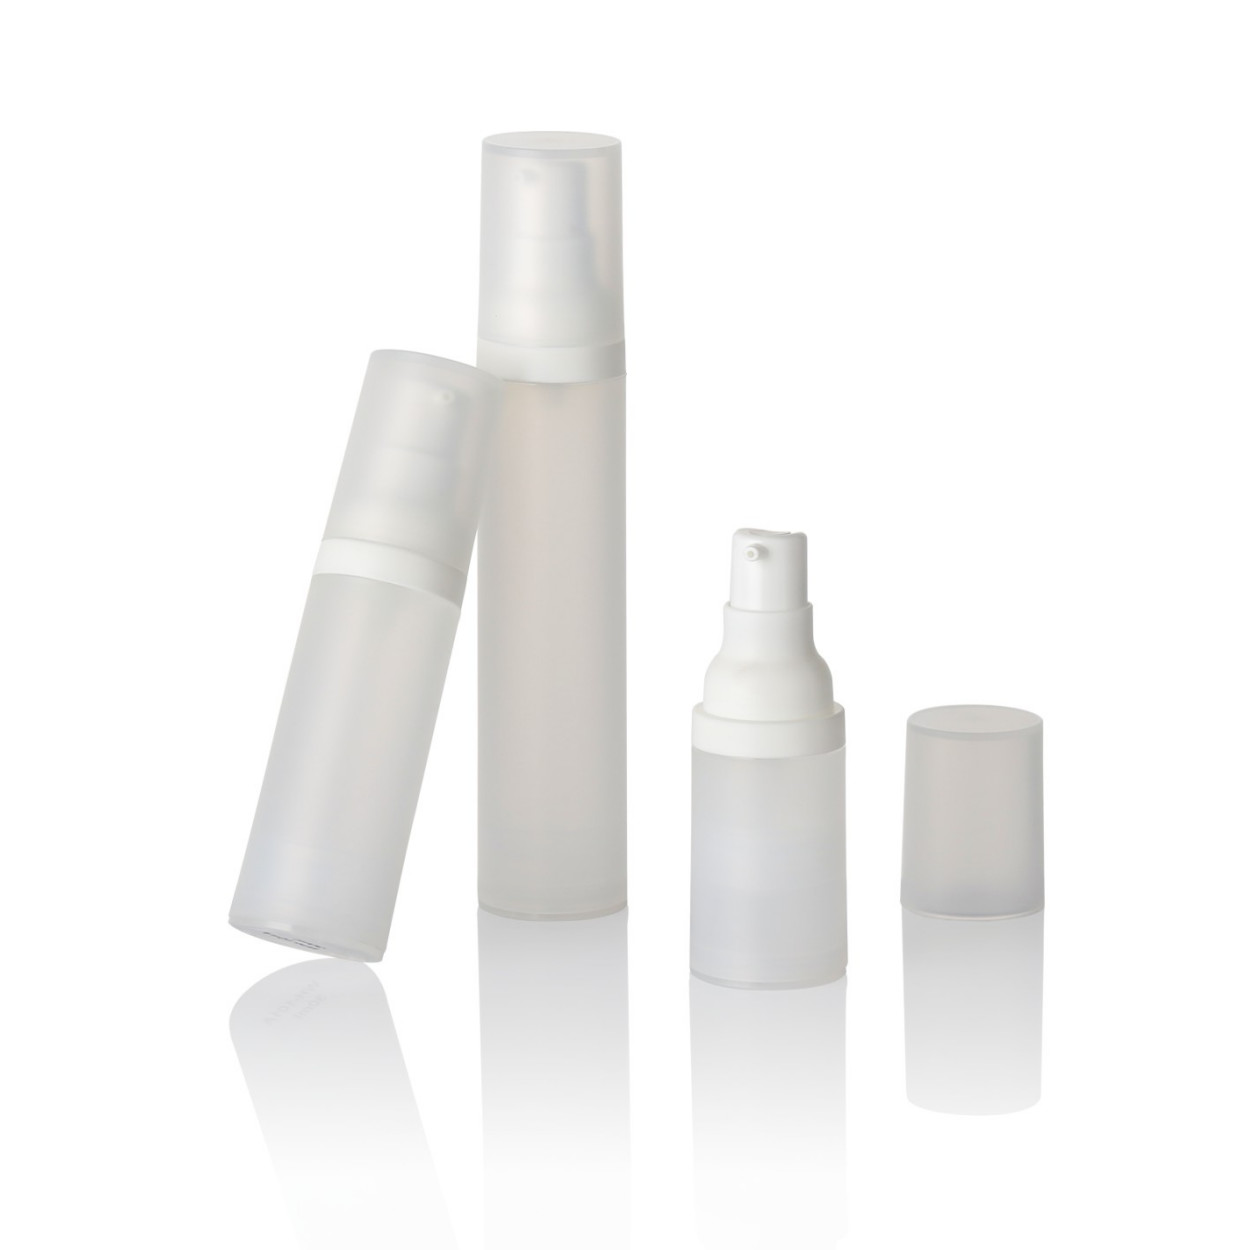  China  PP Airless Pump Bottles 15ml 30ml-50ml-80ml cosmetic lotion pump bottle Manufactures